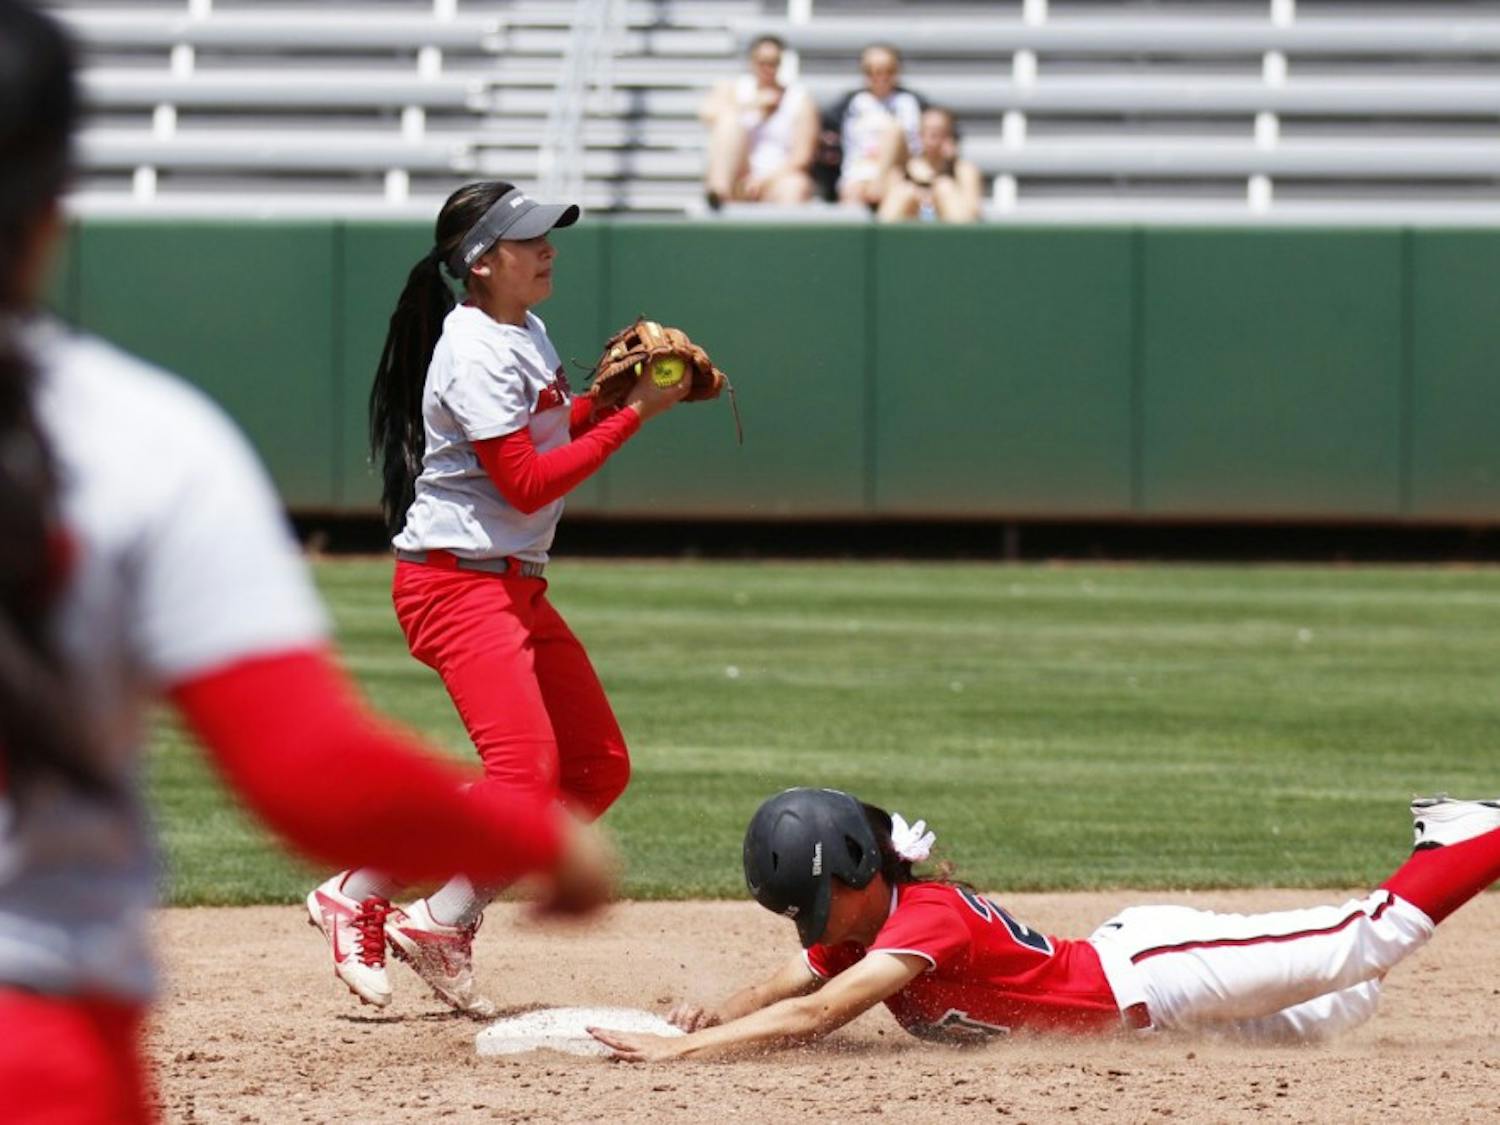 Junior Michala Erickson gets a force out on a UNLV runner Saturday April 23, 2016 at the Lobo Softball Fields. The Lobos will play Boise State this Friday in Boise, Idaho.